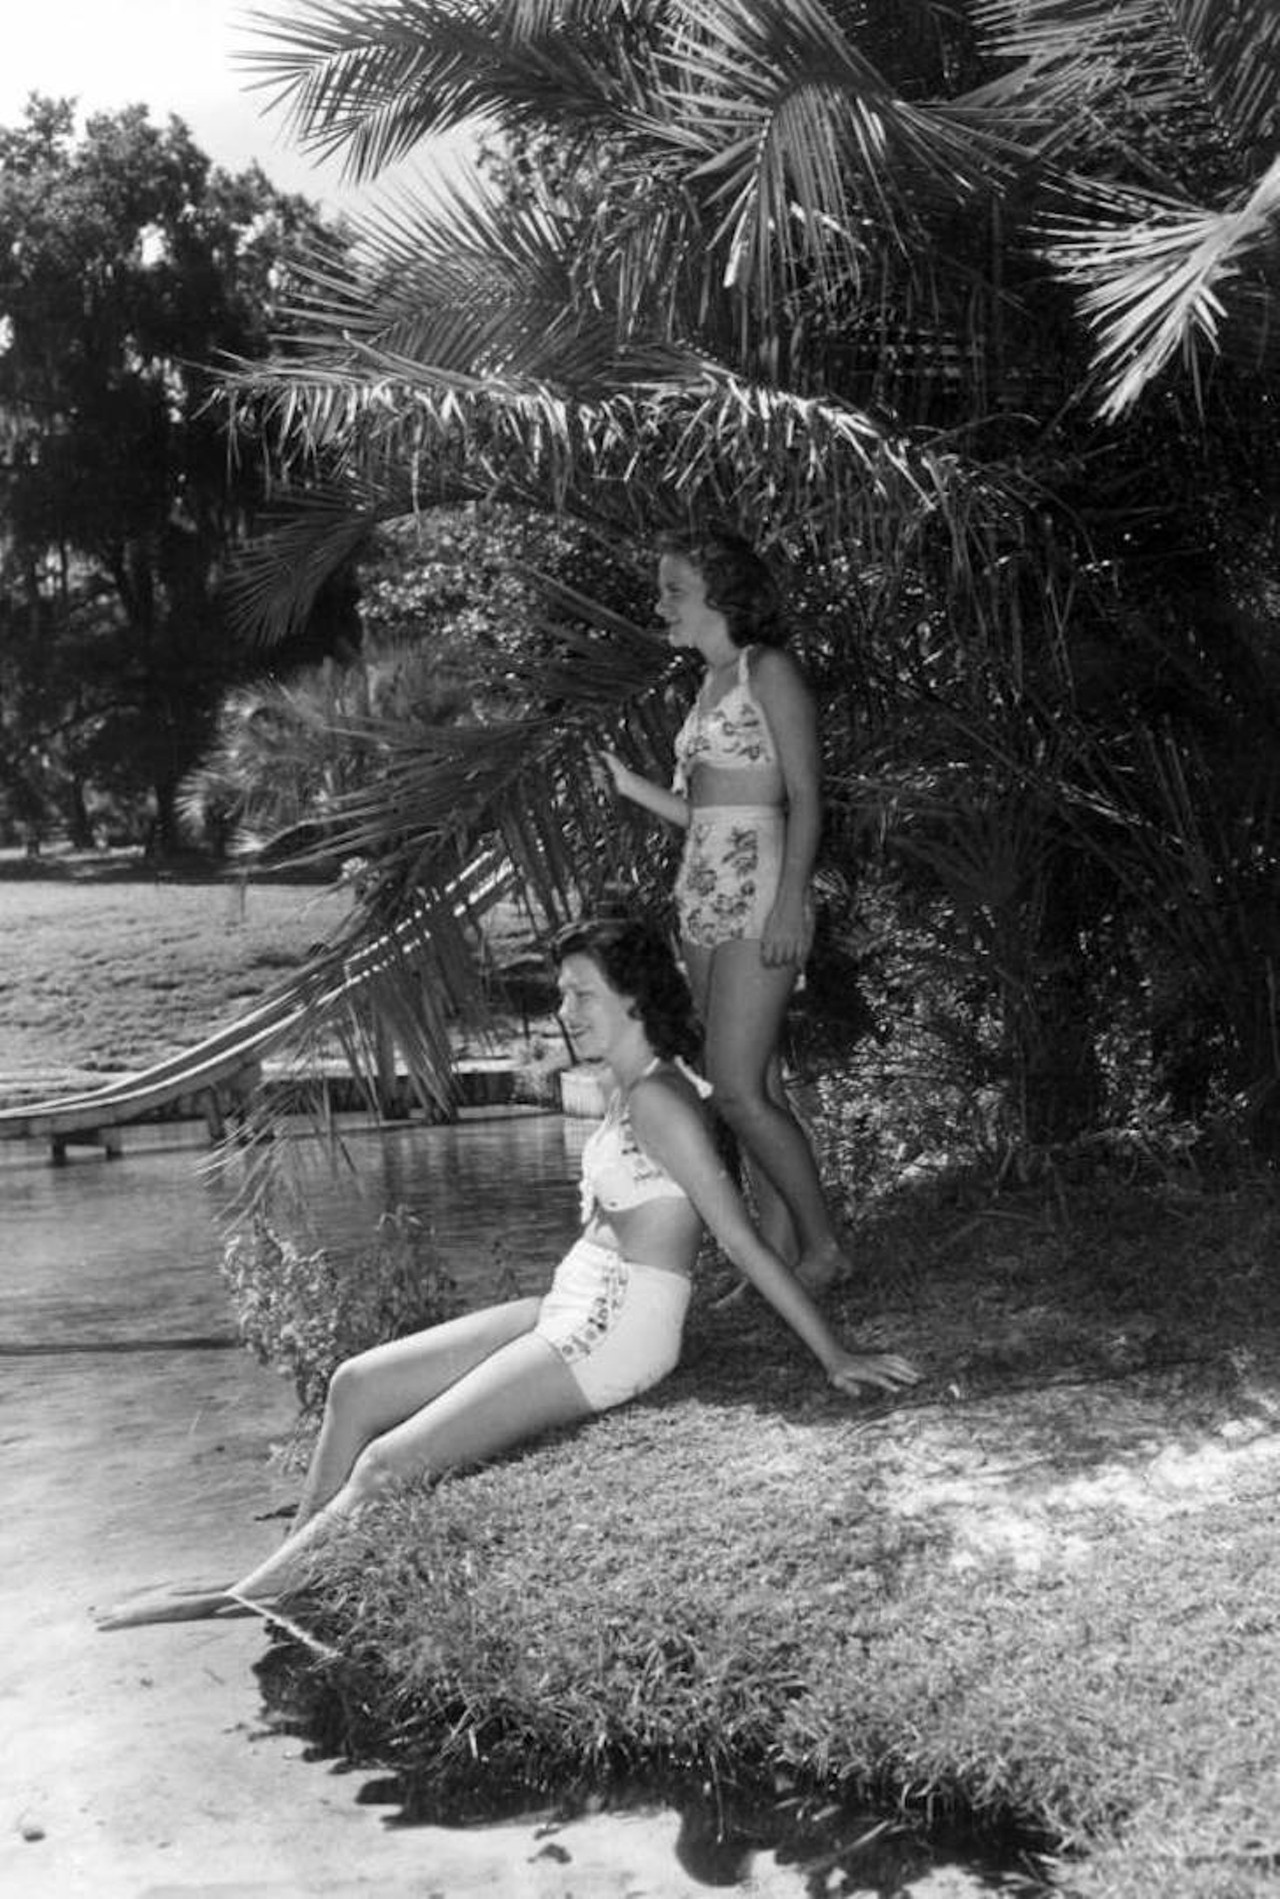 Jo Ann Cloud and Jean Baker at the shore of the springs, 1946.